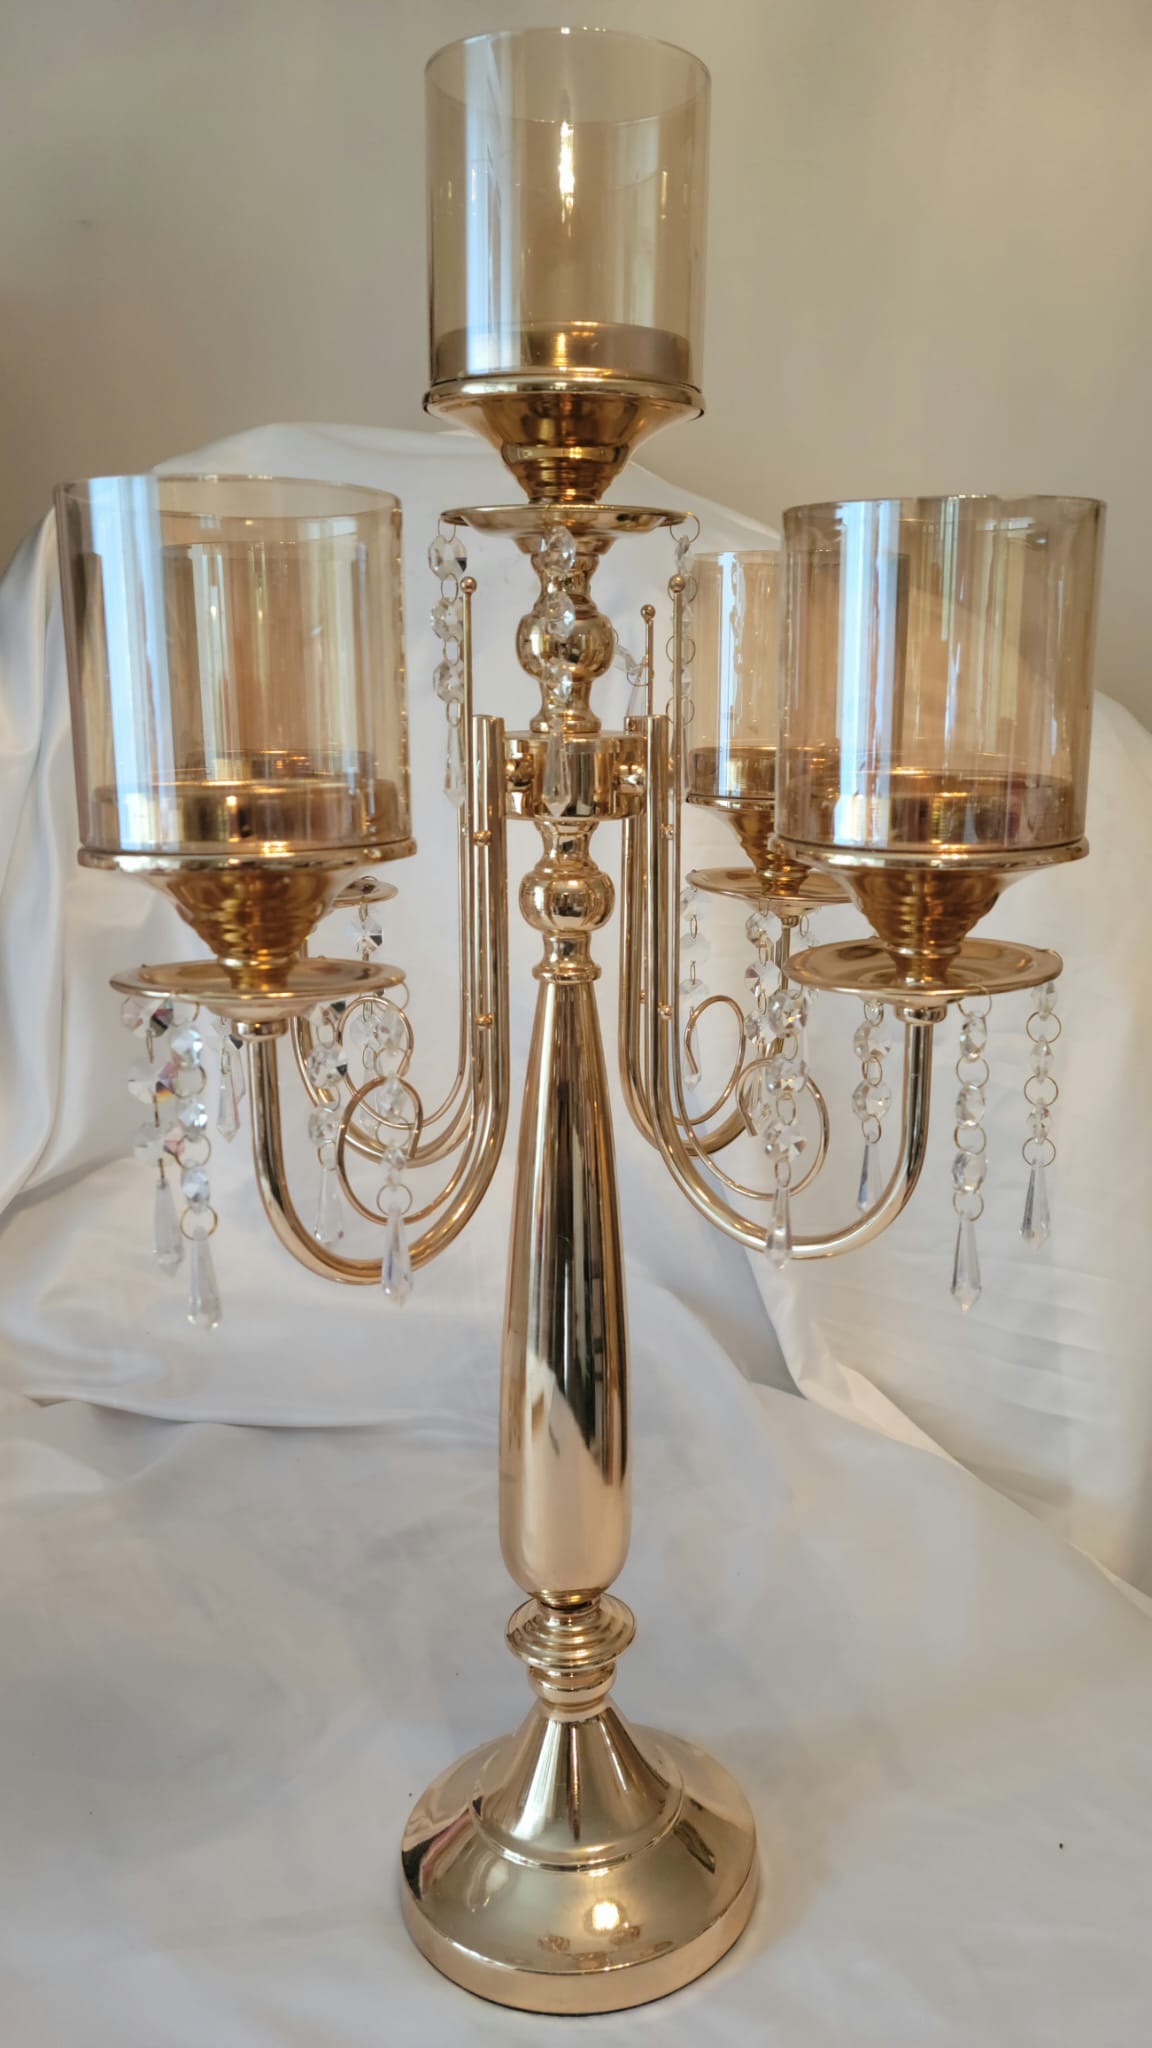 24" gold candelabra with cognac glass